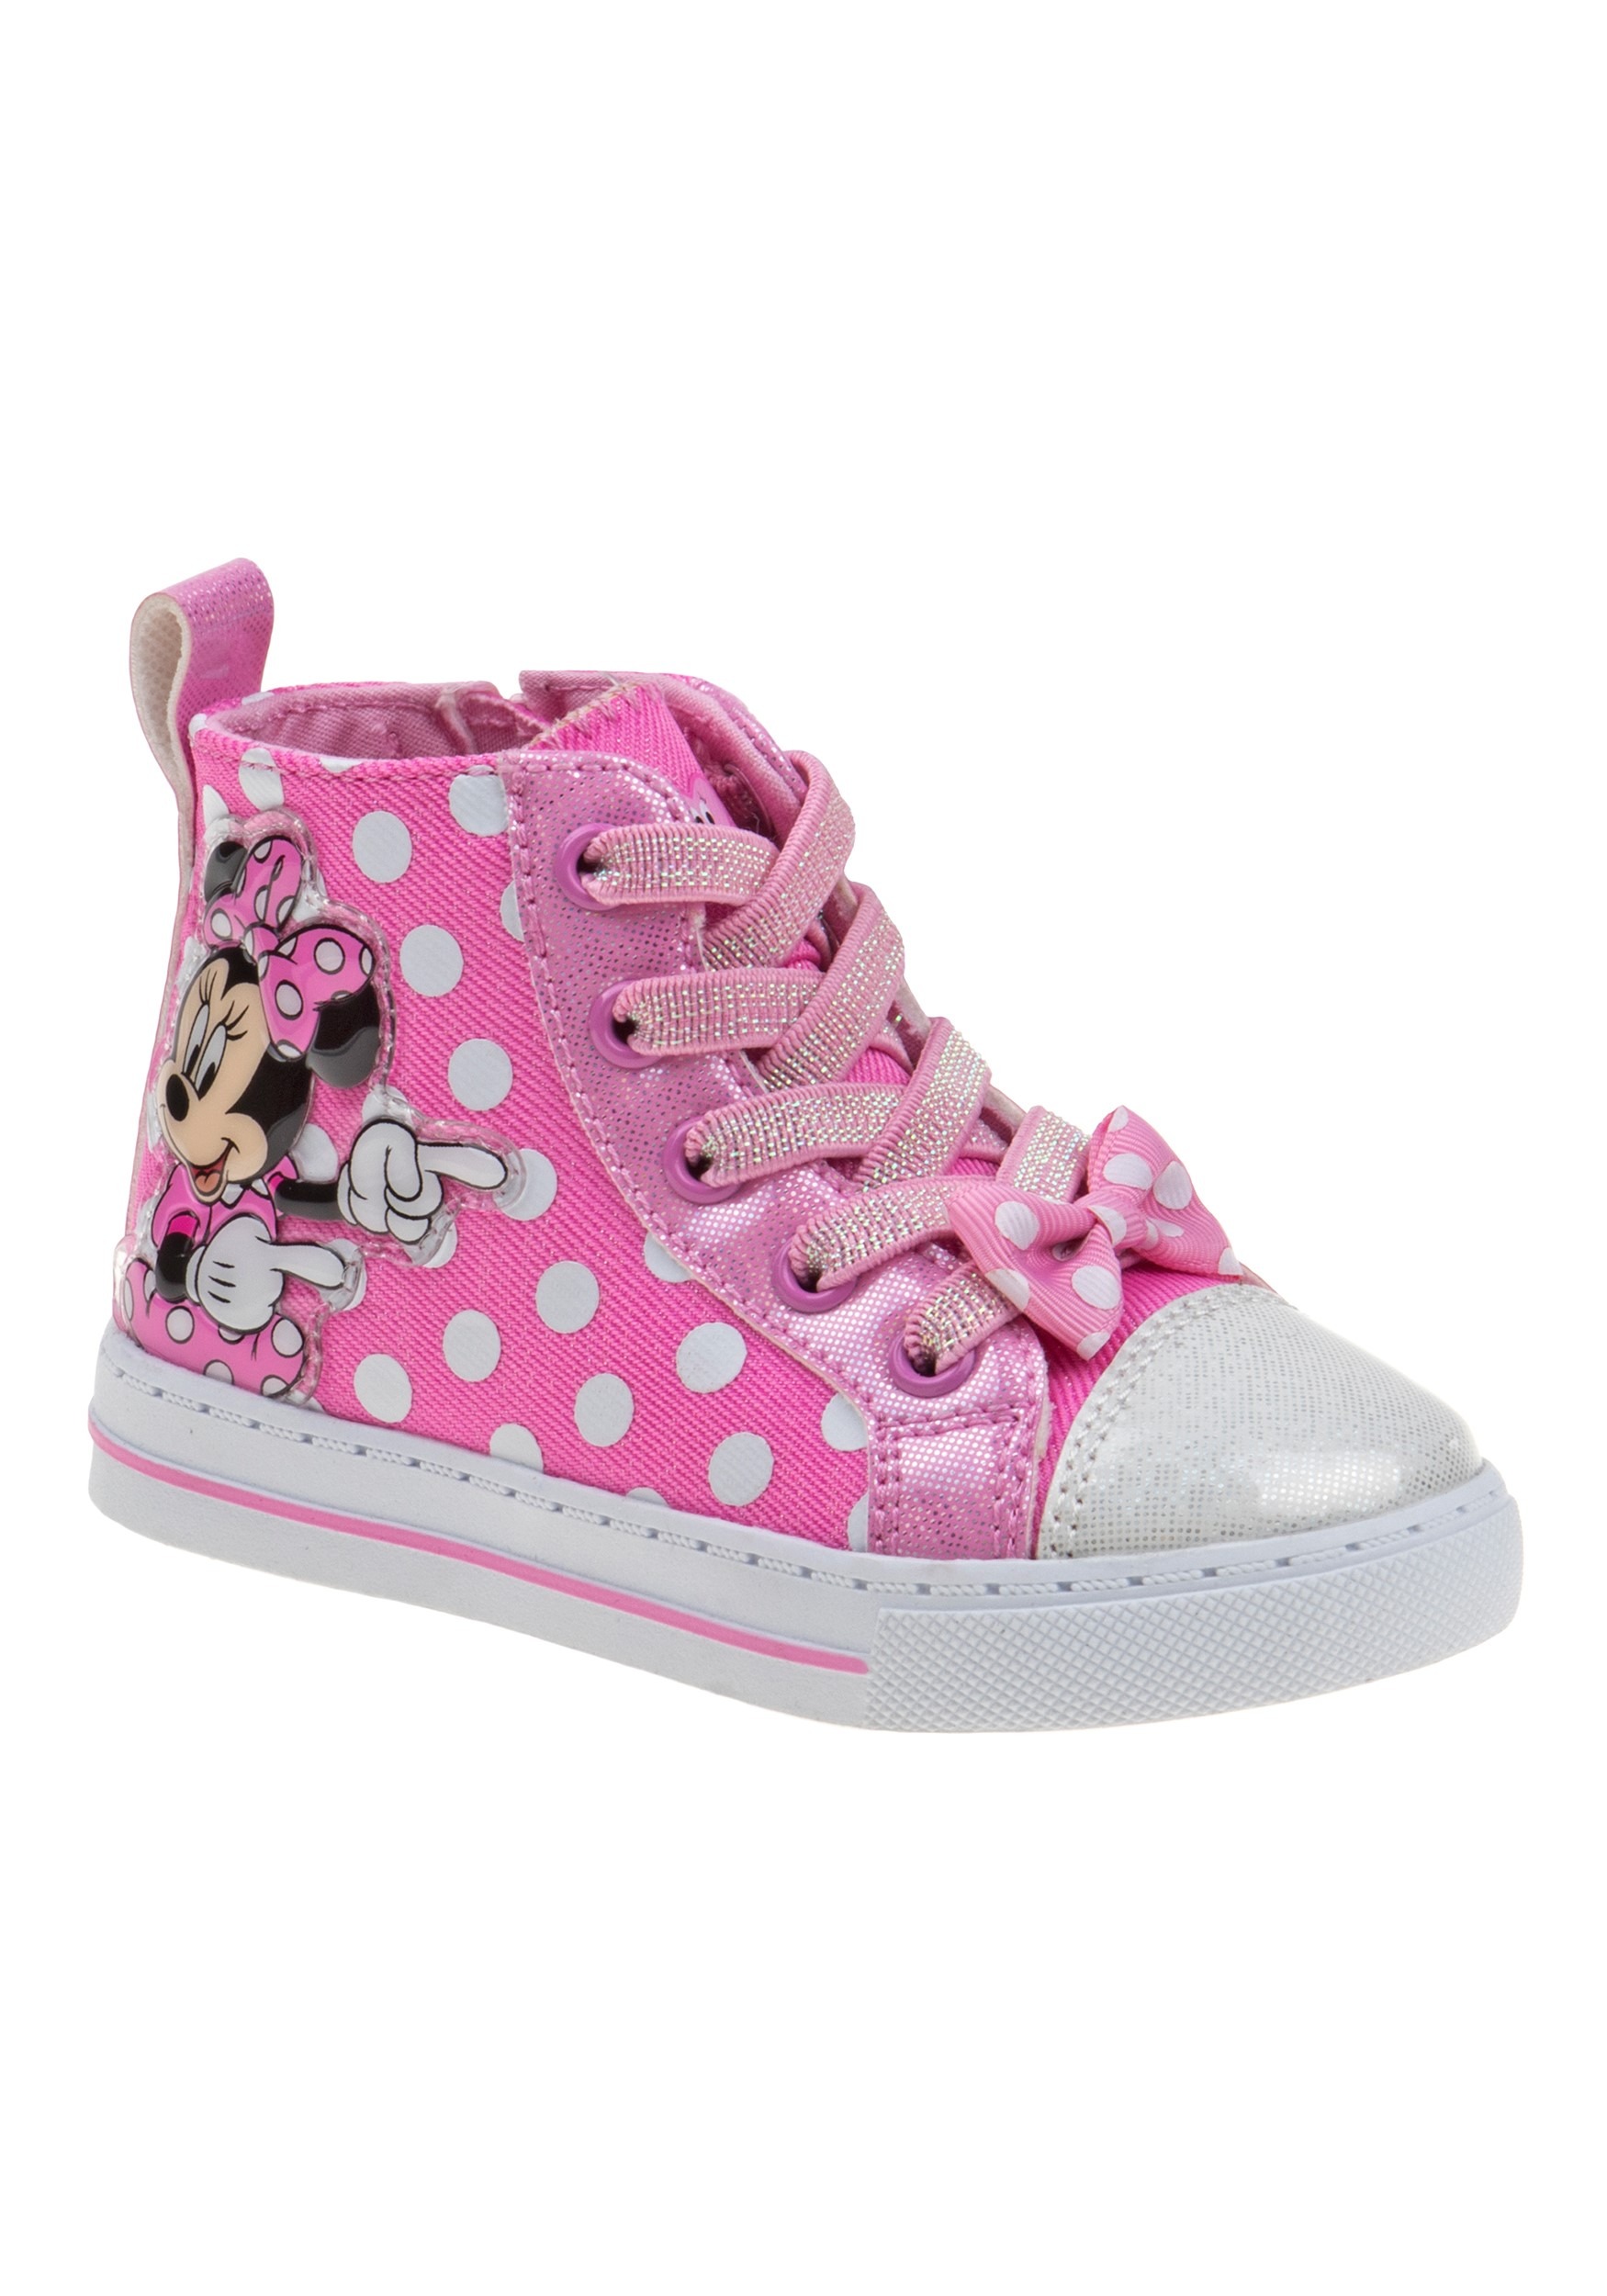 Minnie Mouse Sneakers